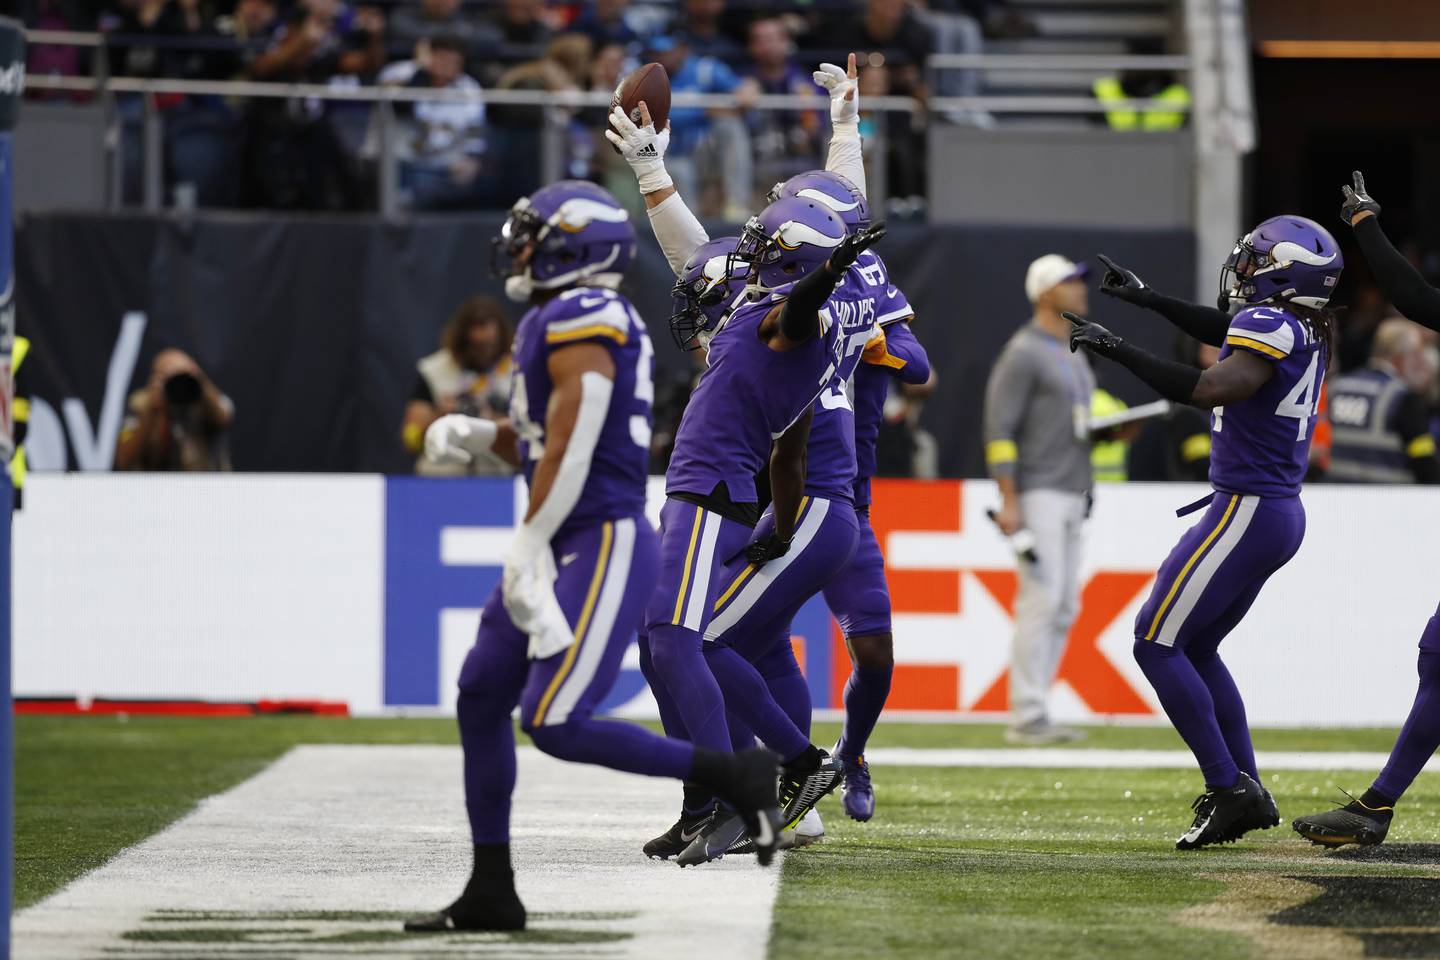 The Vikings defense celebrates after a play against the Saints on Sunday at Tottenham Hotspur Stadium in London. 